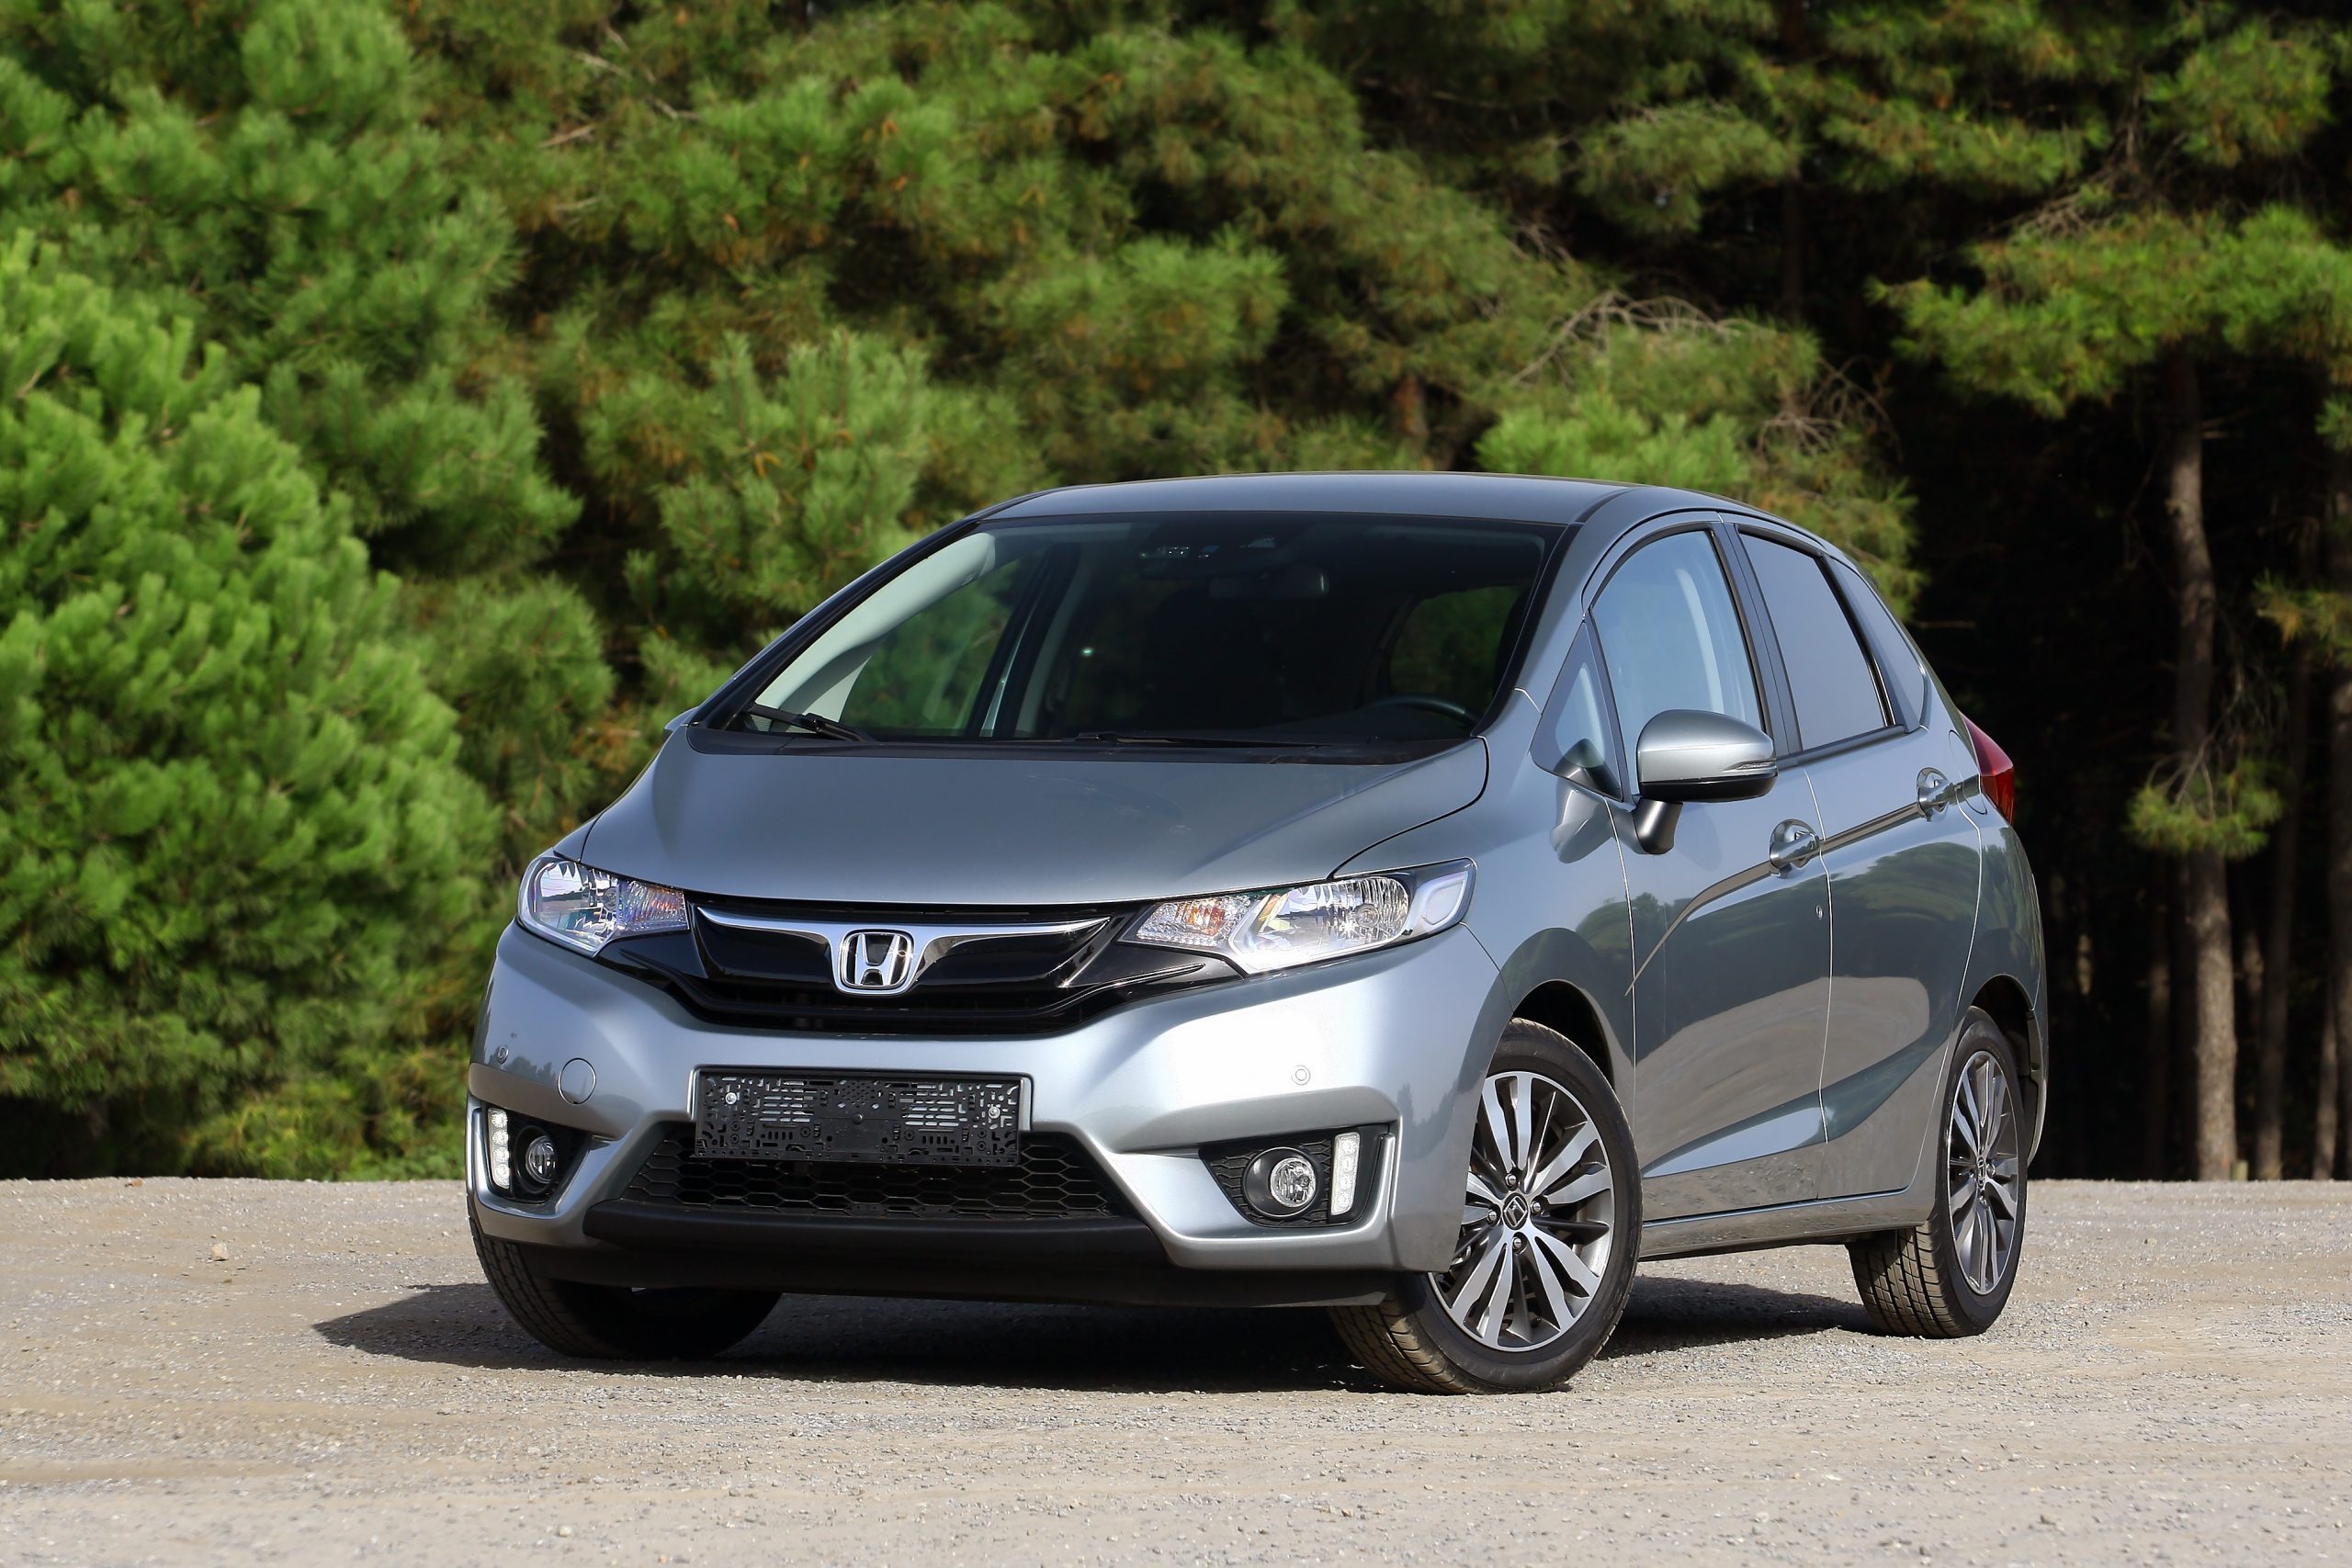 <p>Taking first place in the subcompact category of <a href="https://www.cargurus.com/Cars/articles/2019_used_car_awards" rel="nofollow noopener noreferrer">Car Gurus' annual best used car awards</a>, late model Honda Fits are not only funky and cool on the eye but a used one is easy on the pocketbook too. Car Gurus notes that "the smallest Honda has proven to be a standout in value retention" and that its "tiny exterior dimensions have long belied its spacious interior" which helps to make it a choice for small families as well as teens shopping for their first used car.</p>